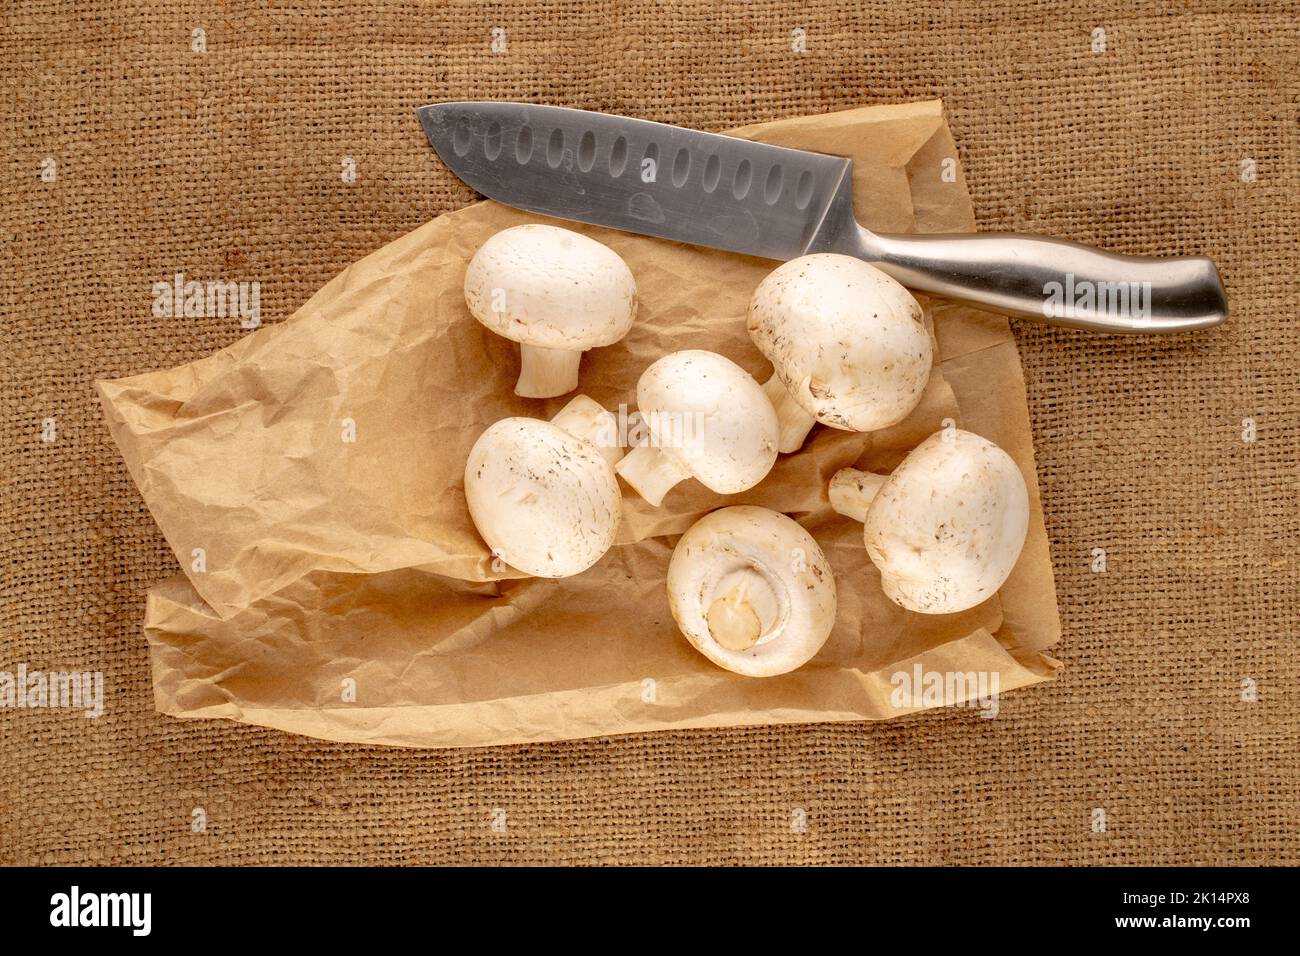 Several aromatic organic mushrooms with paper bag and knife on jute cloth, close-up, top view. Stock Photo